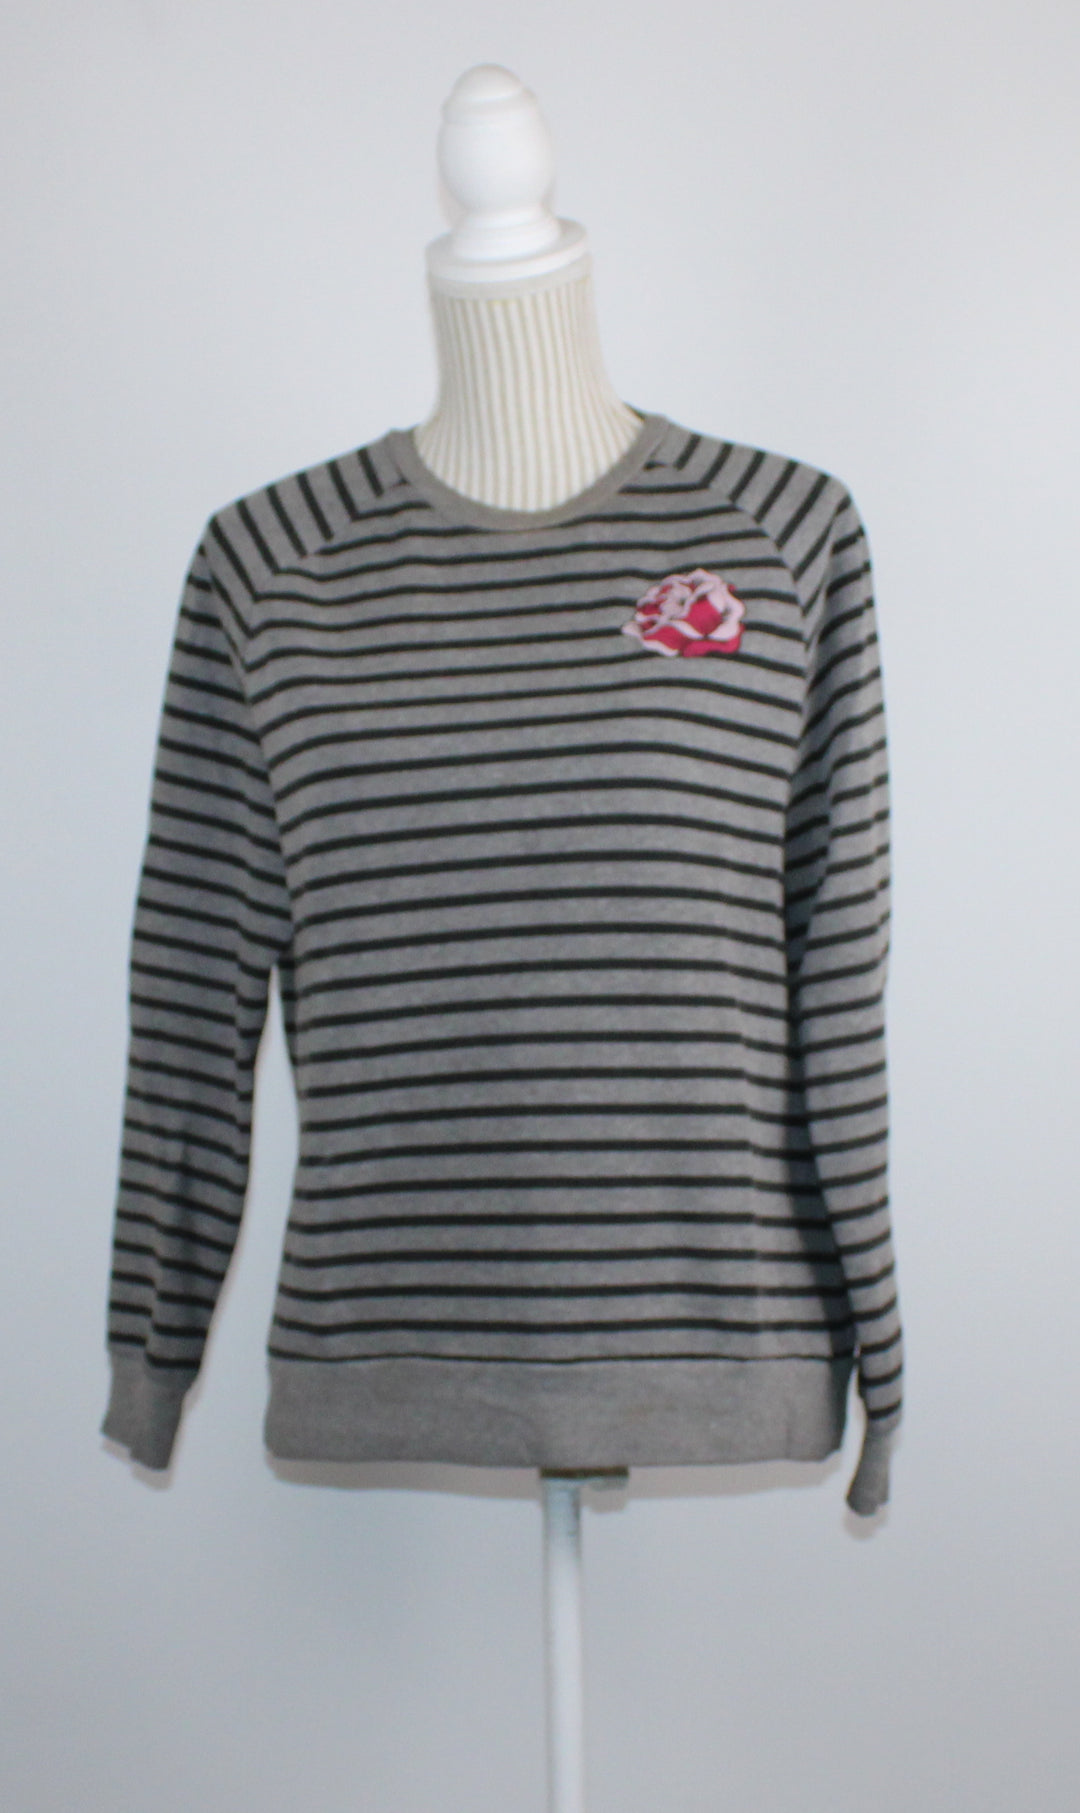 GEORGE STRIPED ROSE SWEATER MED EUC